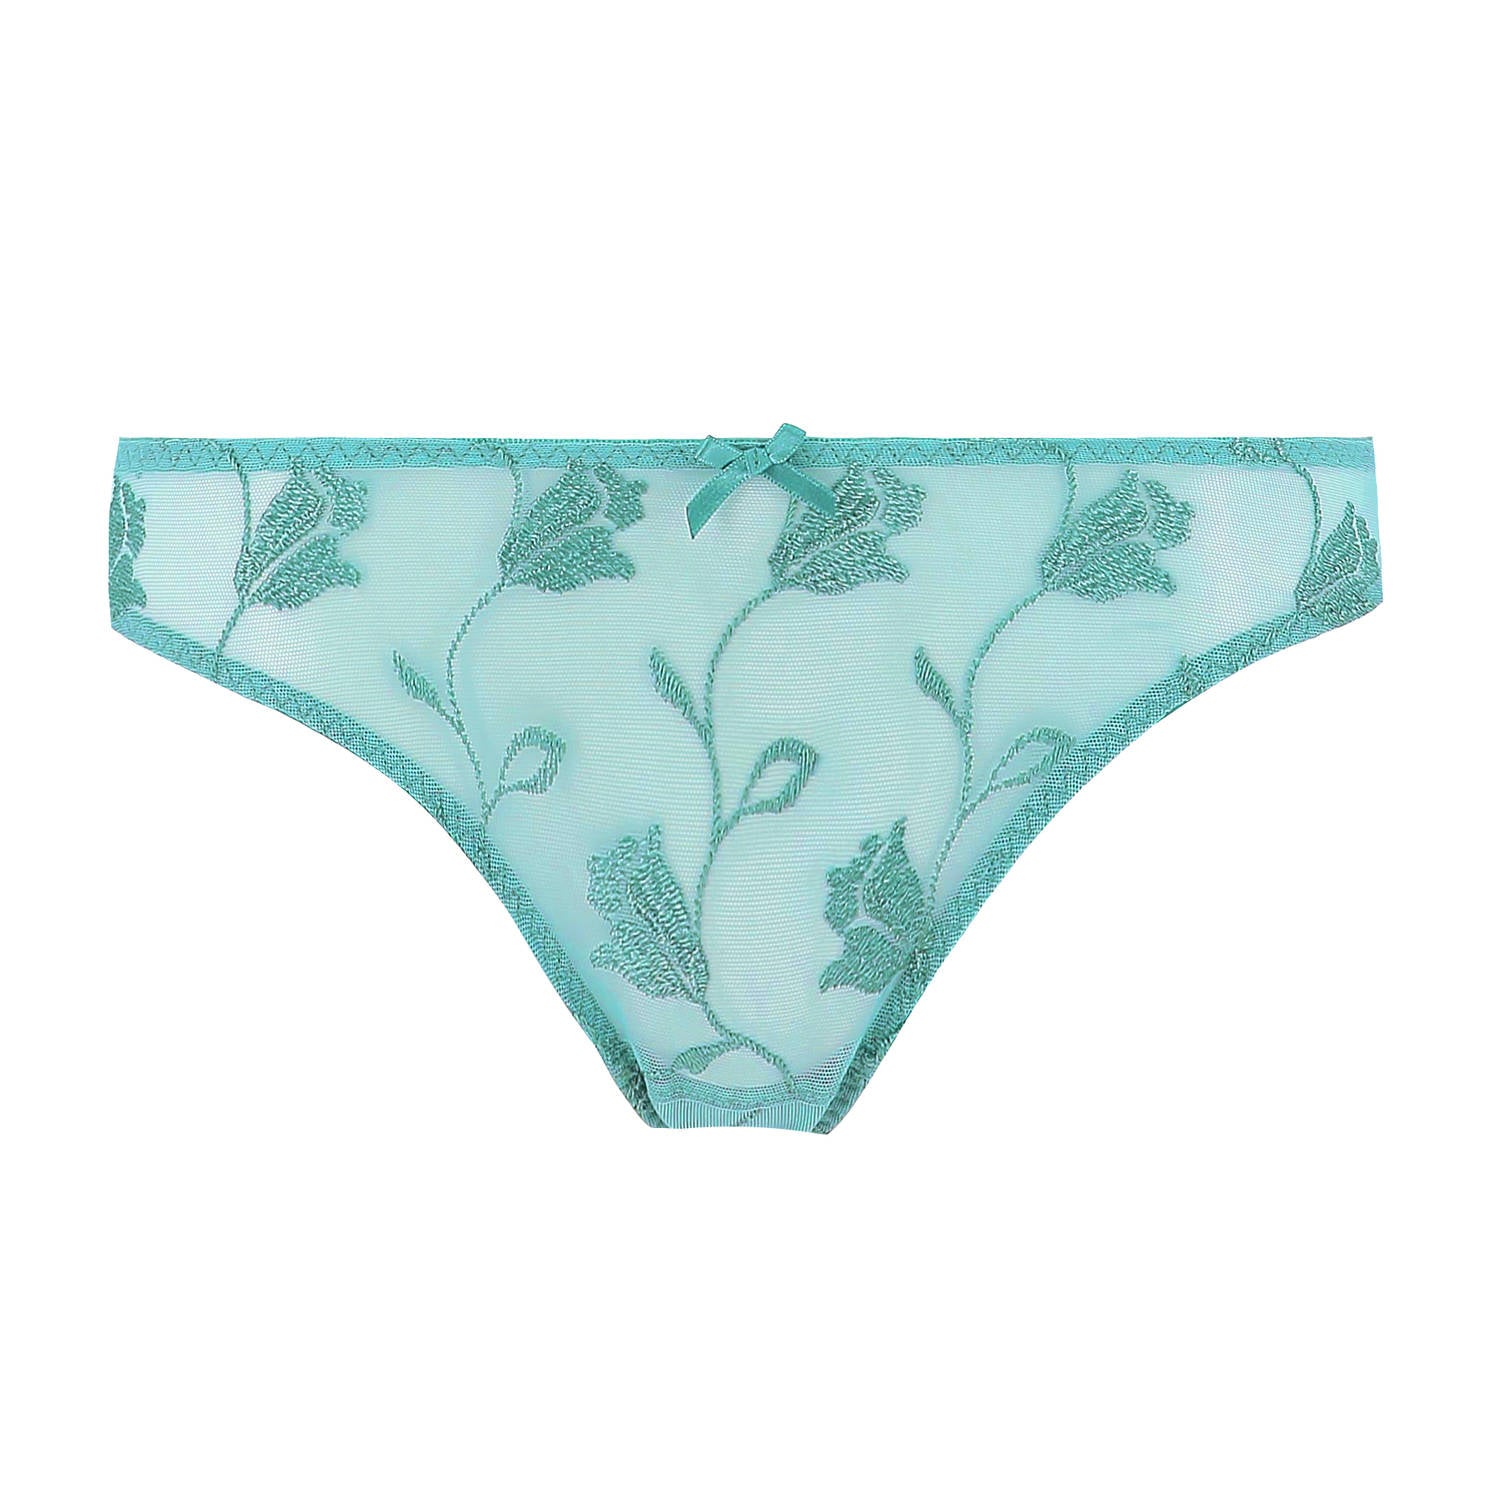 Mint green embroidered knickers for everyday luxury